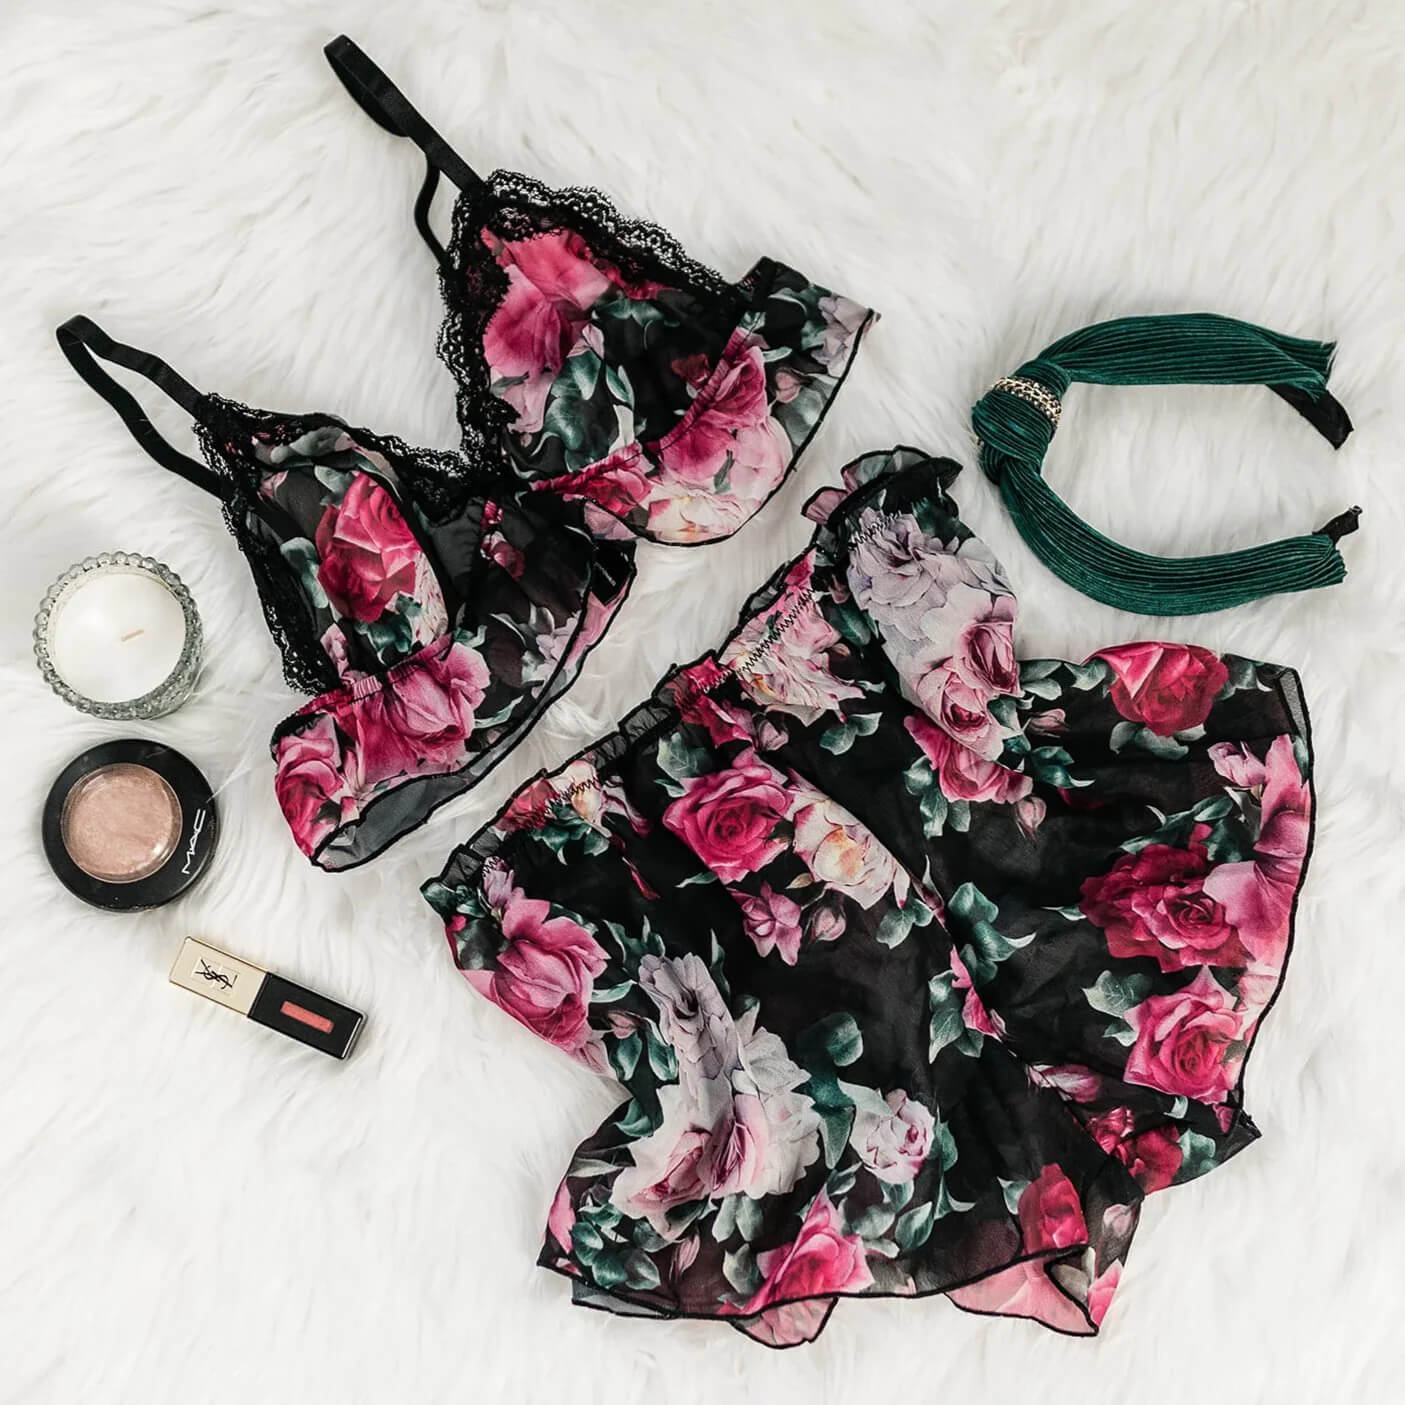 7 Tips On How To Buy Her Lingerie She'll Love – The Adventure